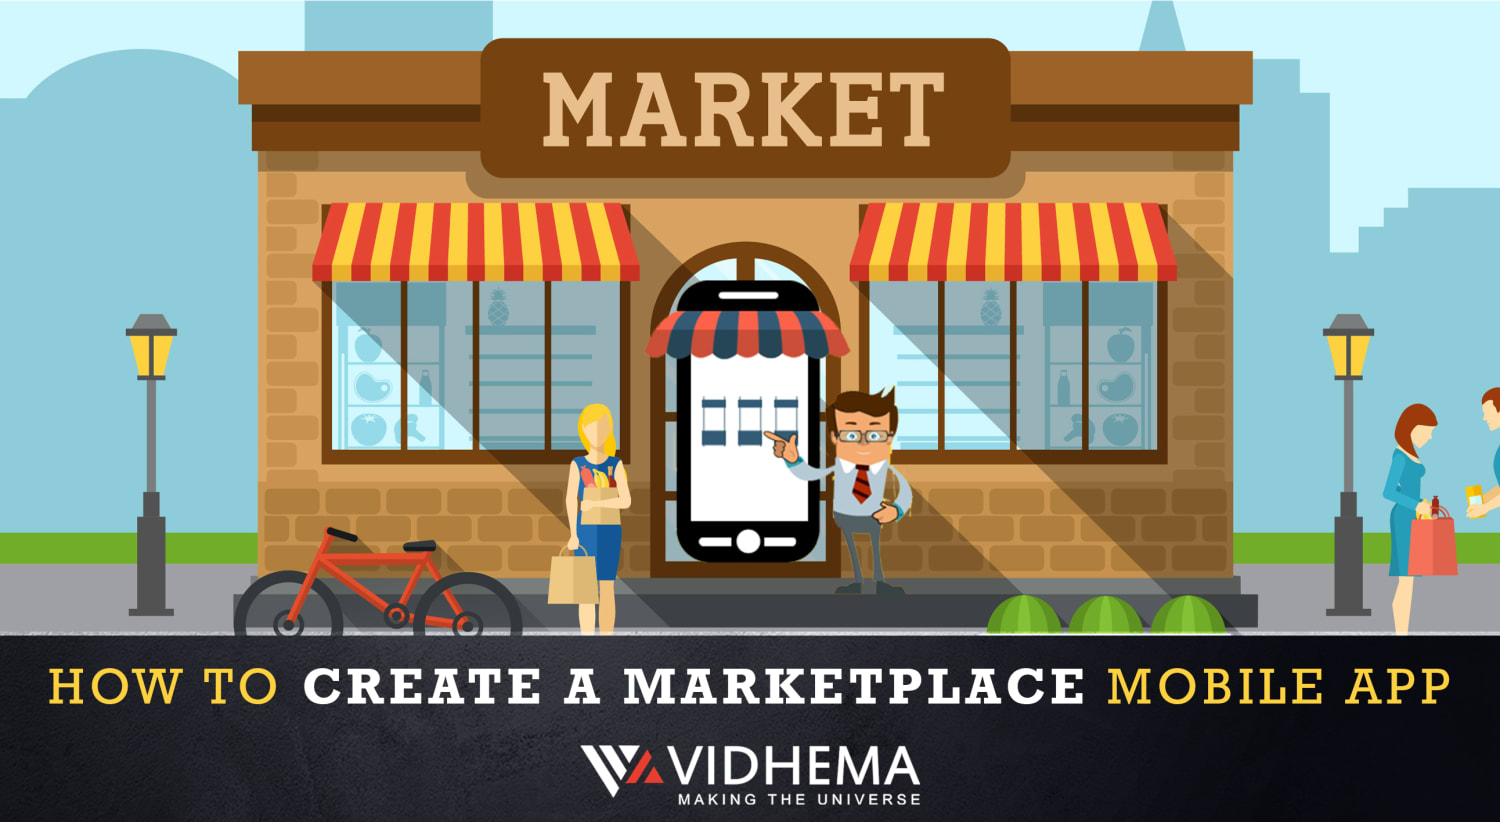 How To Create a Marketplace Mobile App